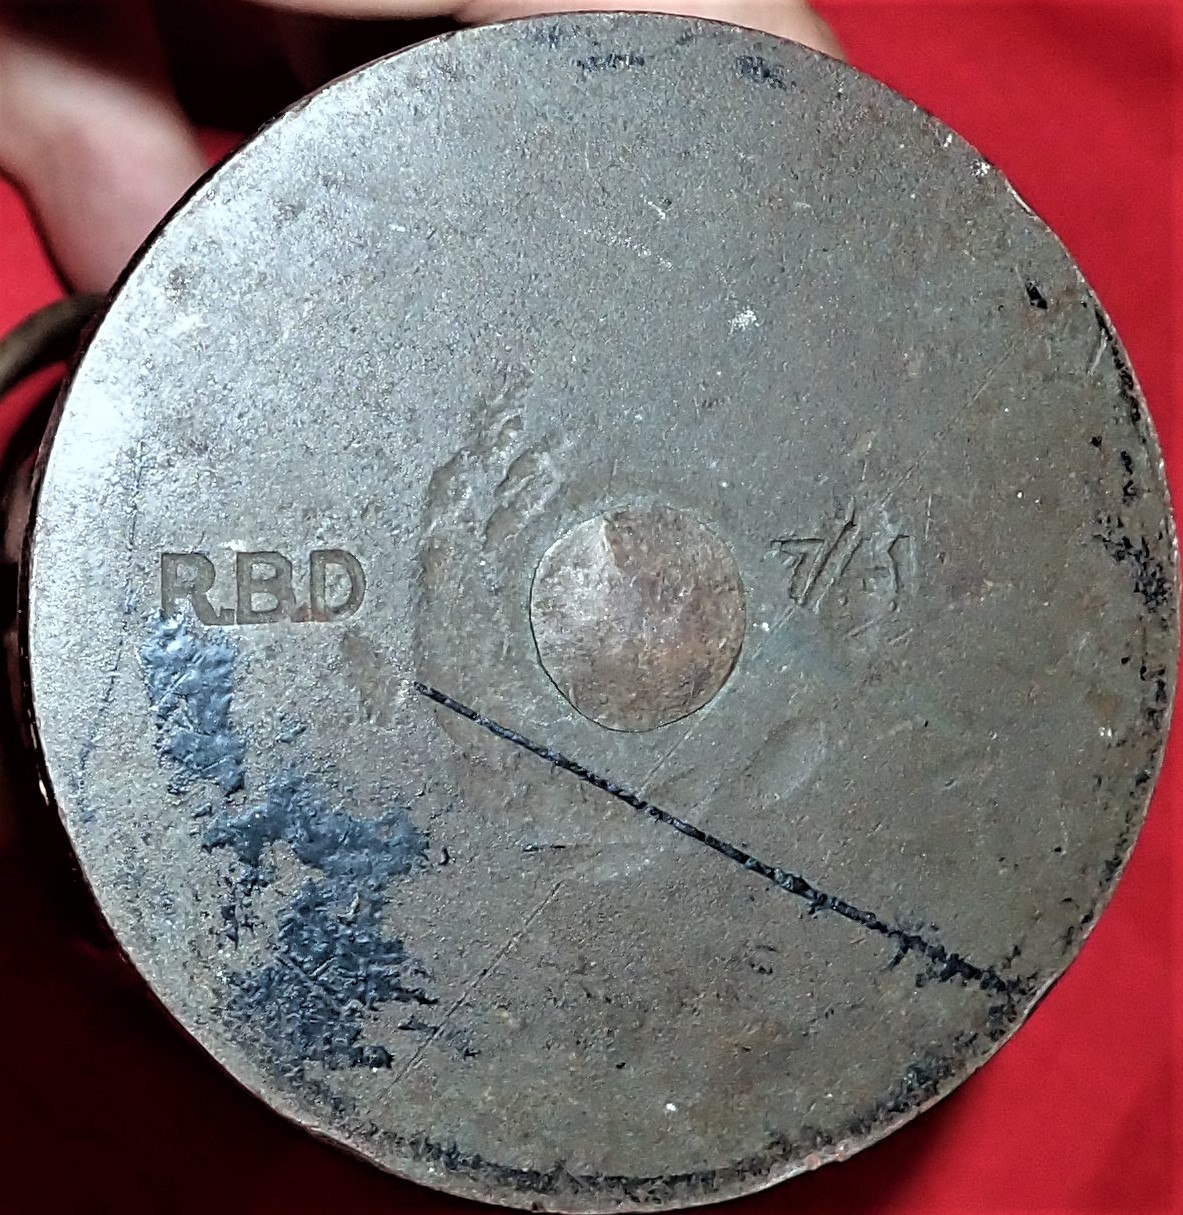 WW2 Australian ‘Mills Bomb’ grenade, dated 1941 & RBD stamped - Image 7 of 7